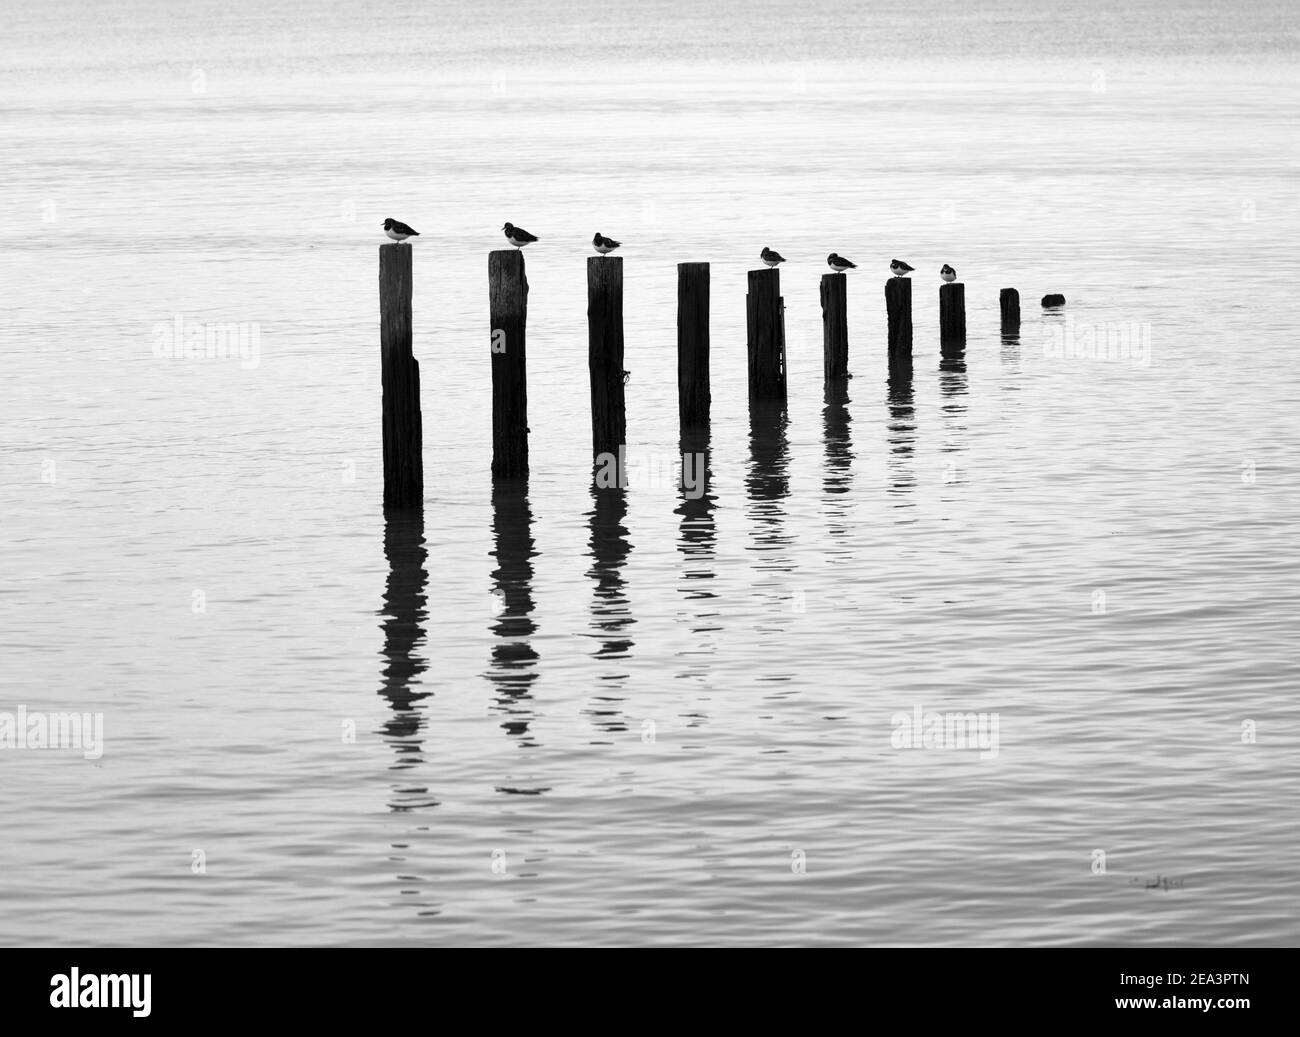 Turnstones perched on the remains of old groynes reflected in calm water. Stock Photo